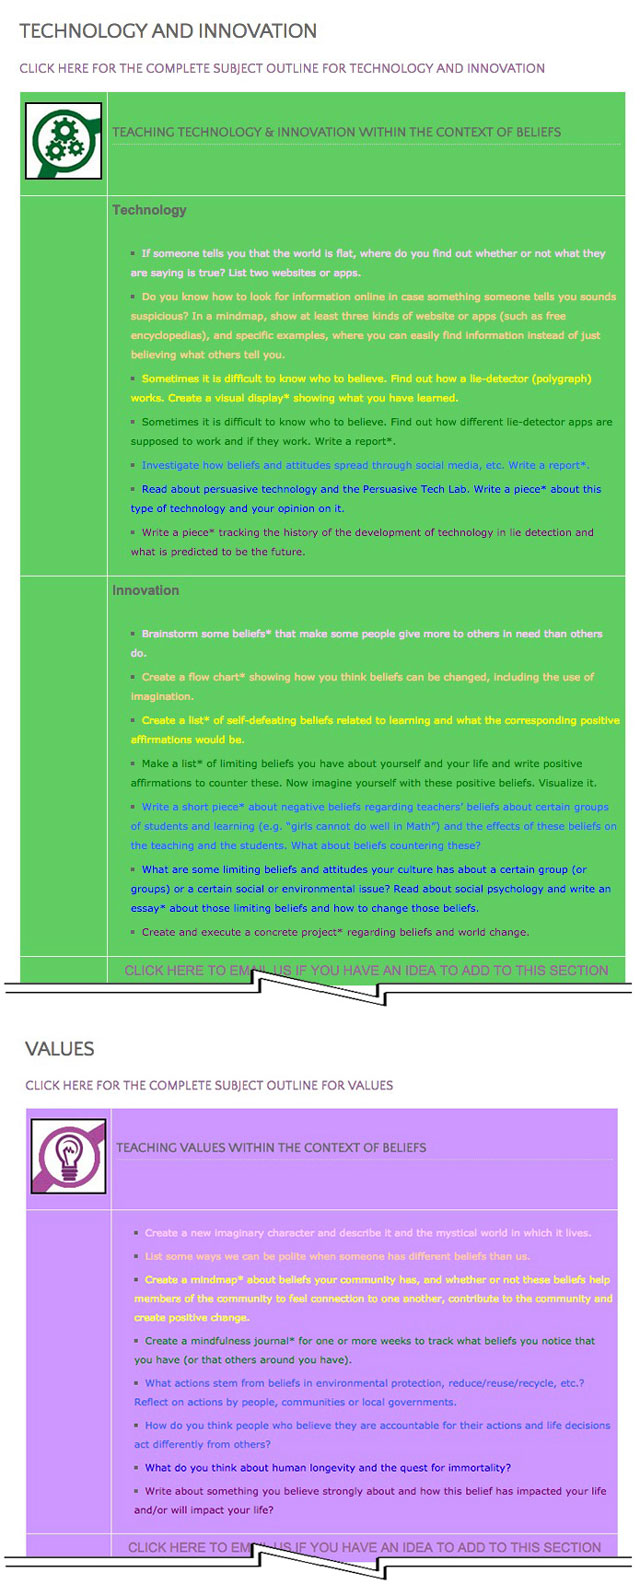 This last week the core team transferred the final 25% of the written content for the Beliefs Lesson Plan to the website, as you see here. This lesson plan purposed to teach all subjects, to all learning levels, in any learning environment, using the central theme of “Beliefs” is now 100% completed on our website.